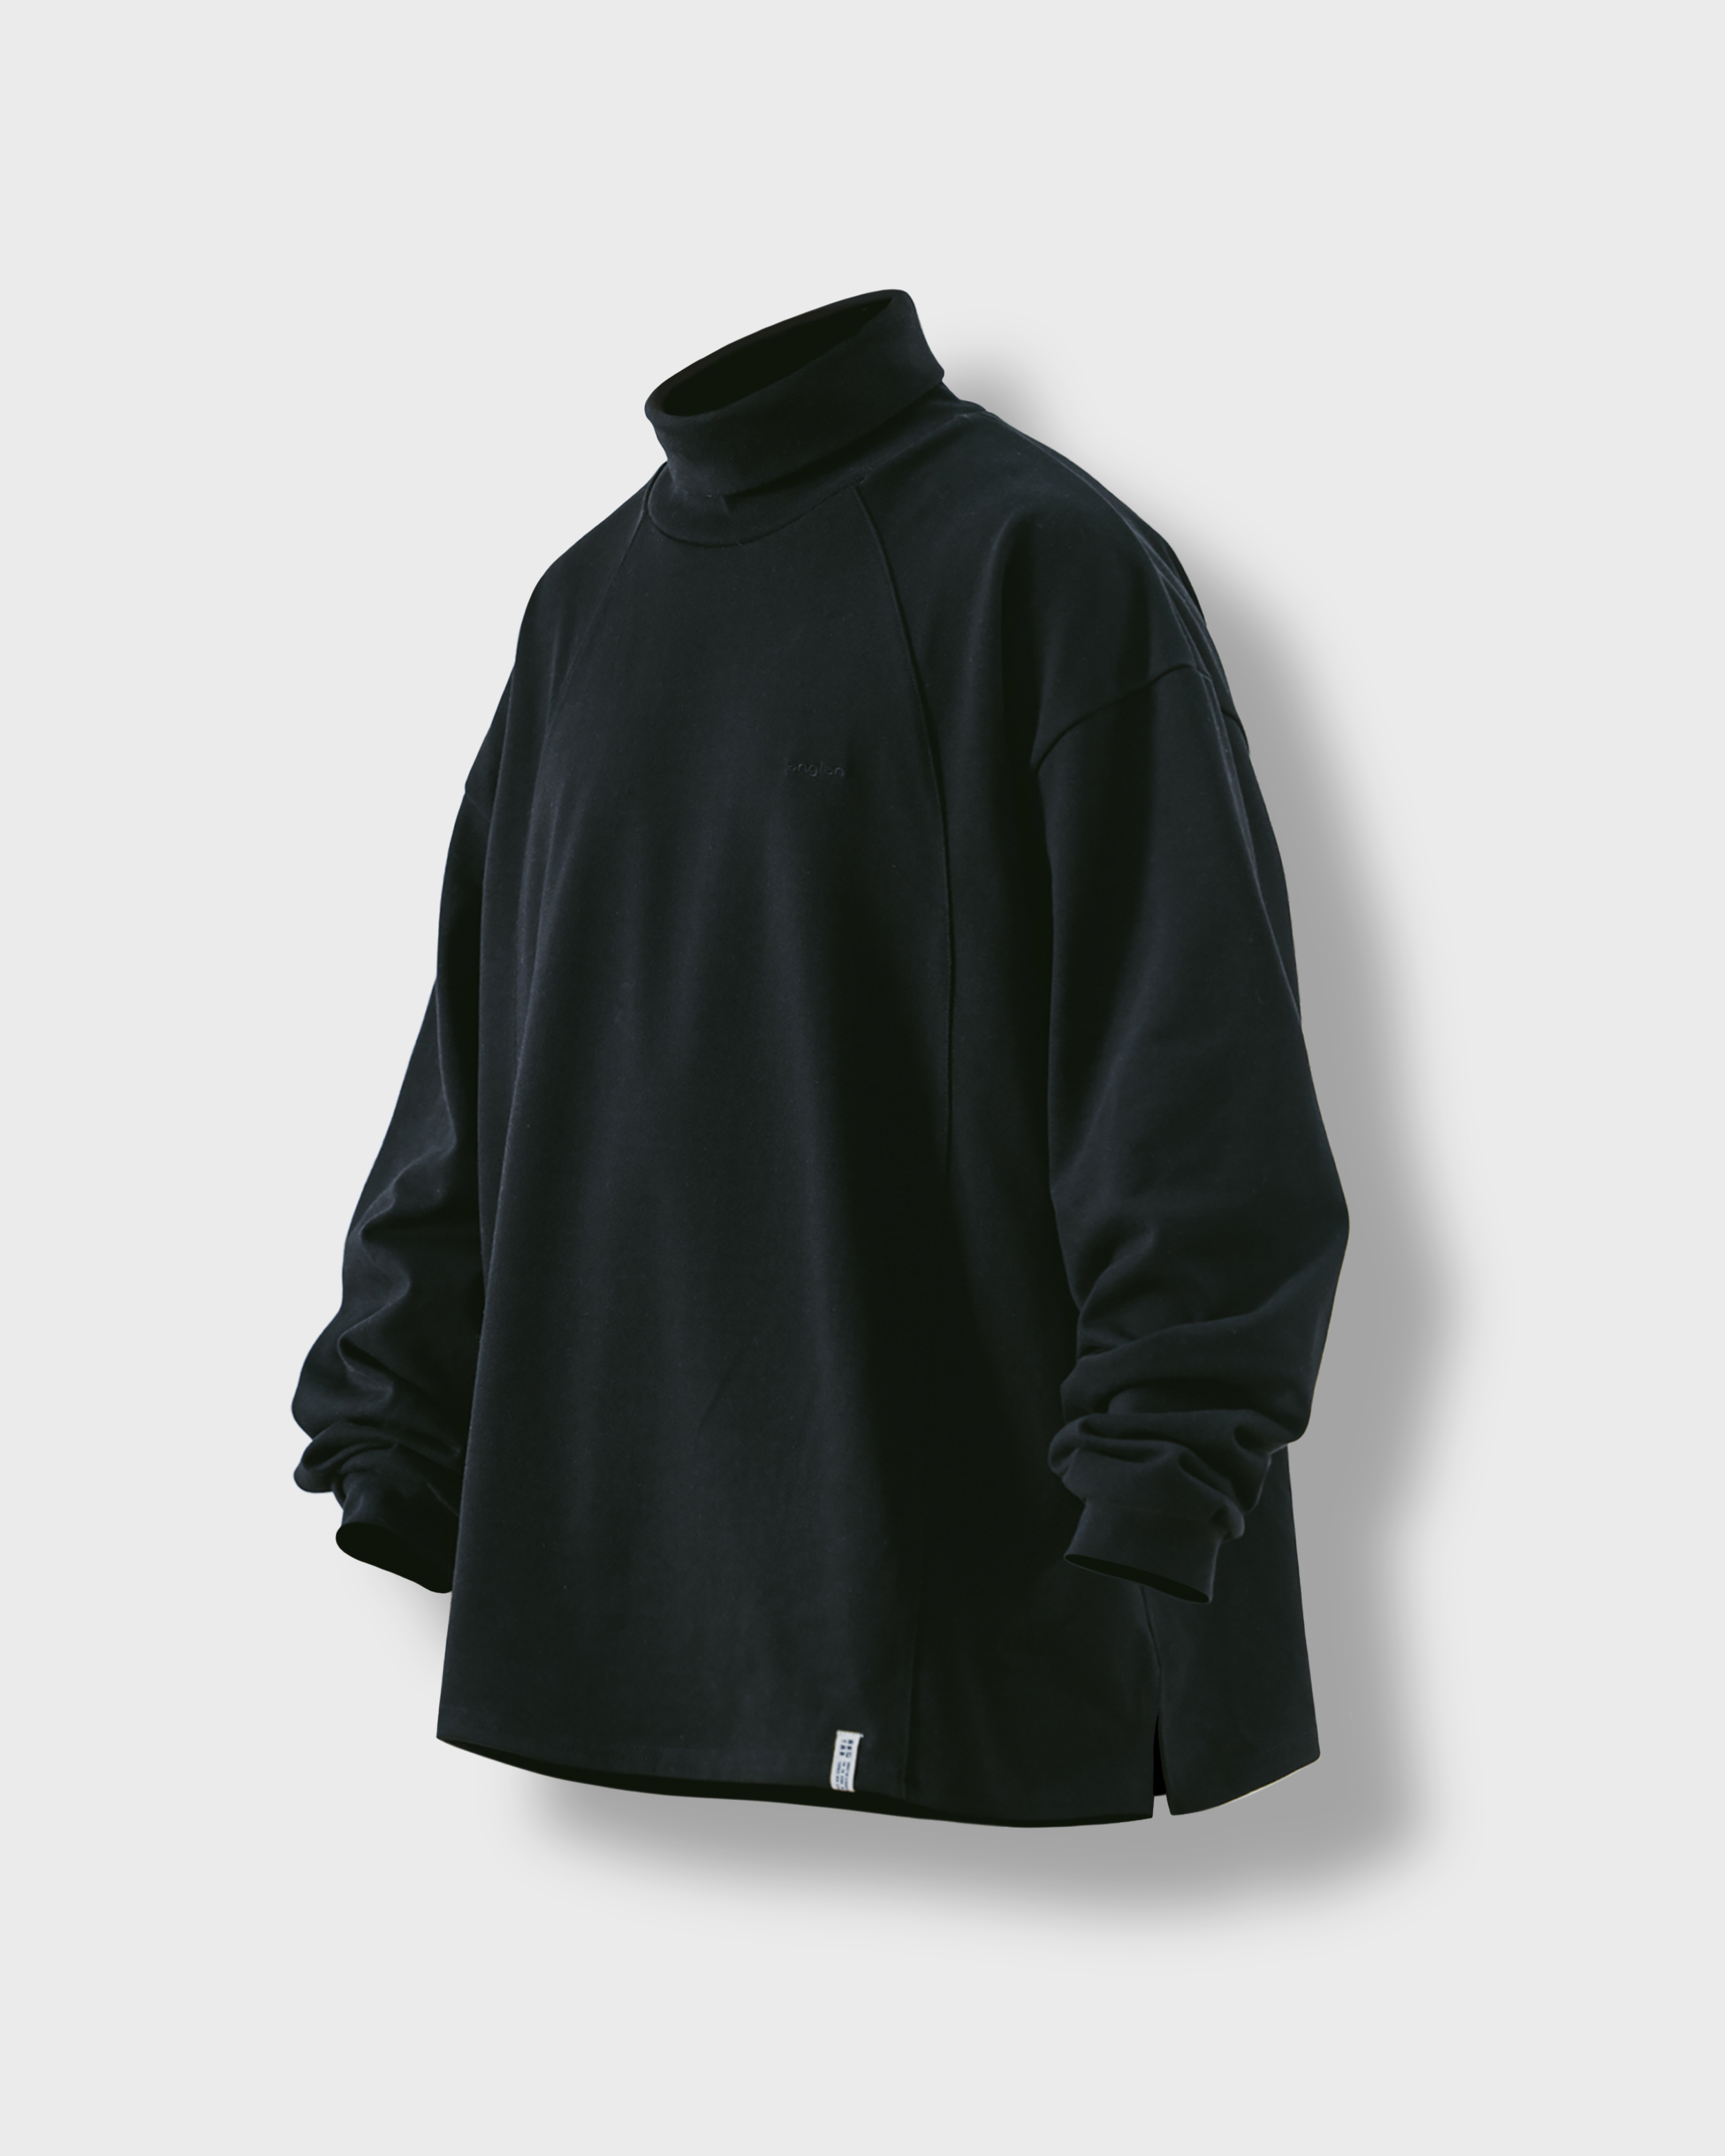 [AG] Oval Incision Turtle Neck Long Sleeve - Black